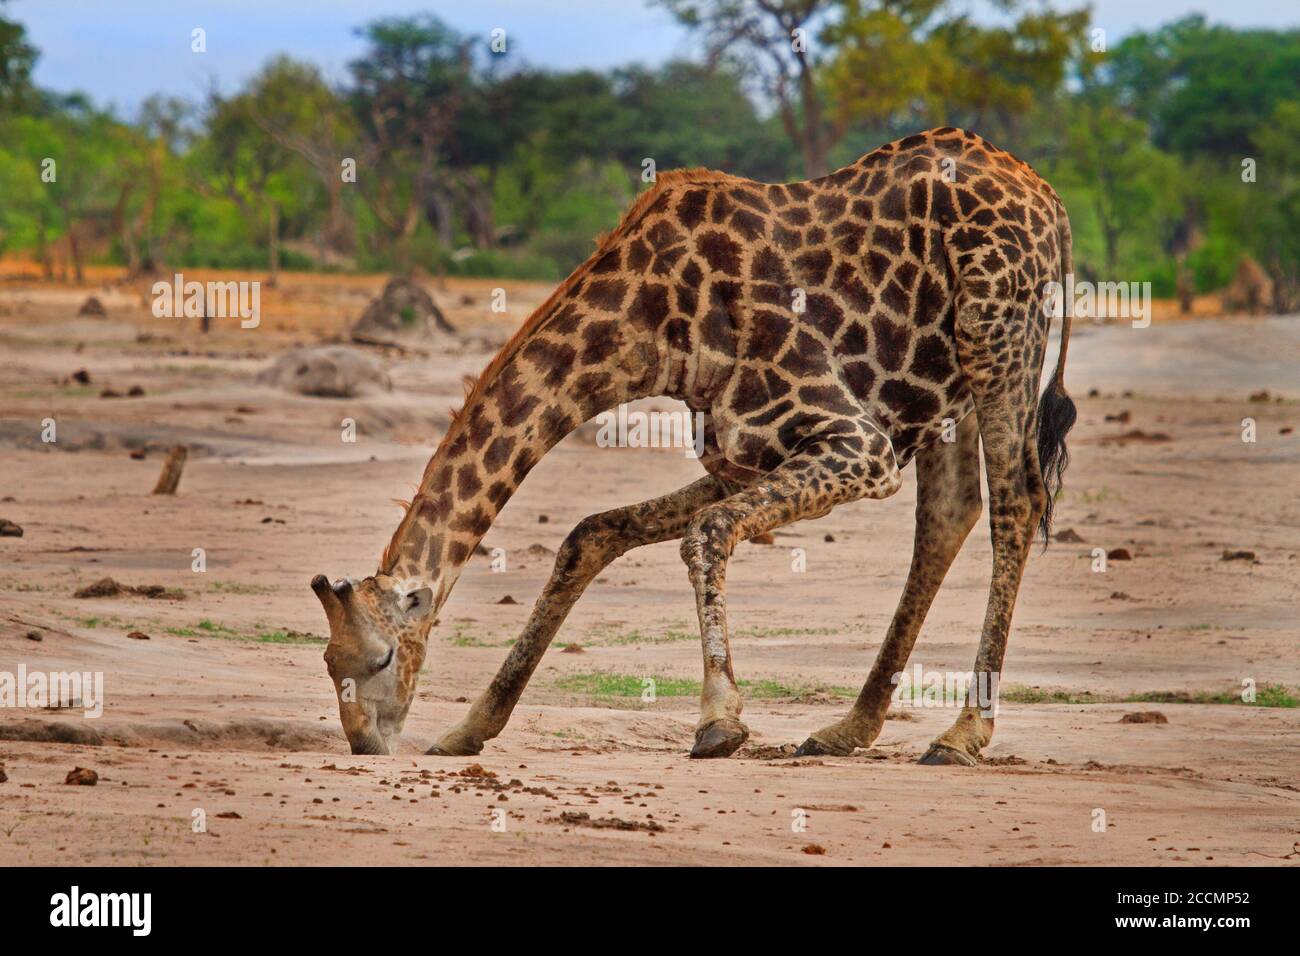 Common Giraffe bending down the front paws bent, taking a drink from a  small pool of water, against a natural bush and savannah background, Hwange Stock Photo